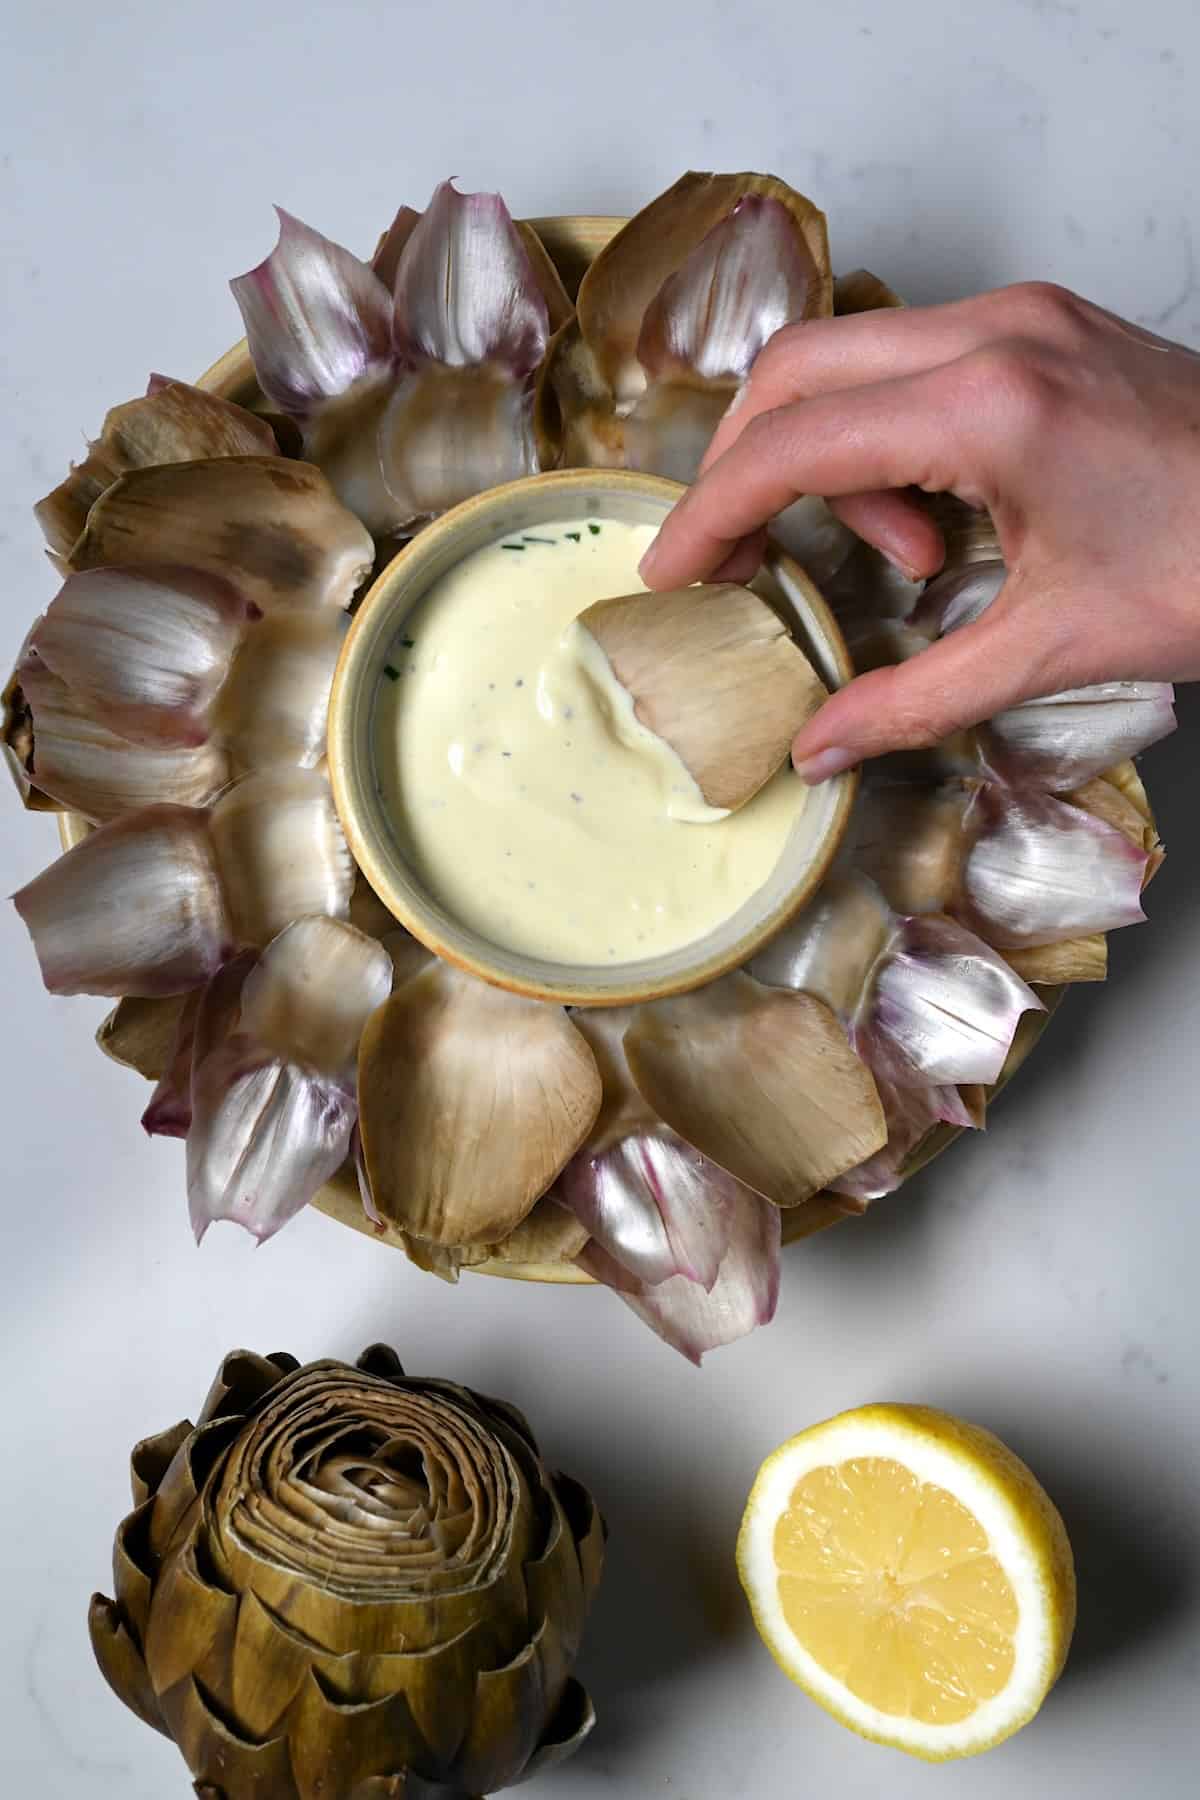 Artichoke dipping sauce in a bowl and artichoke leaves around it